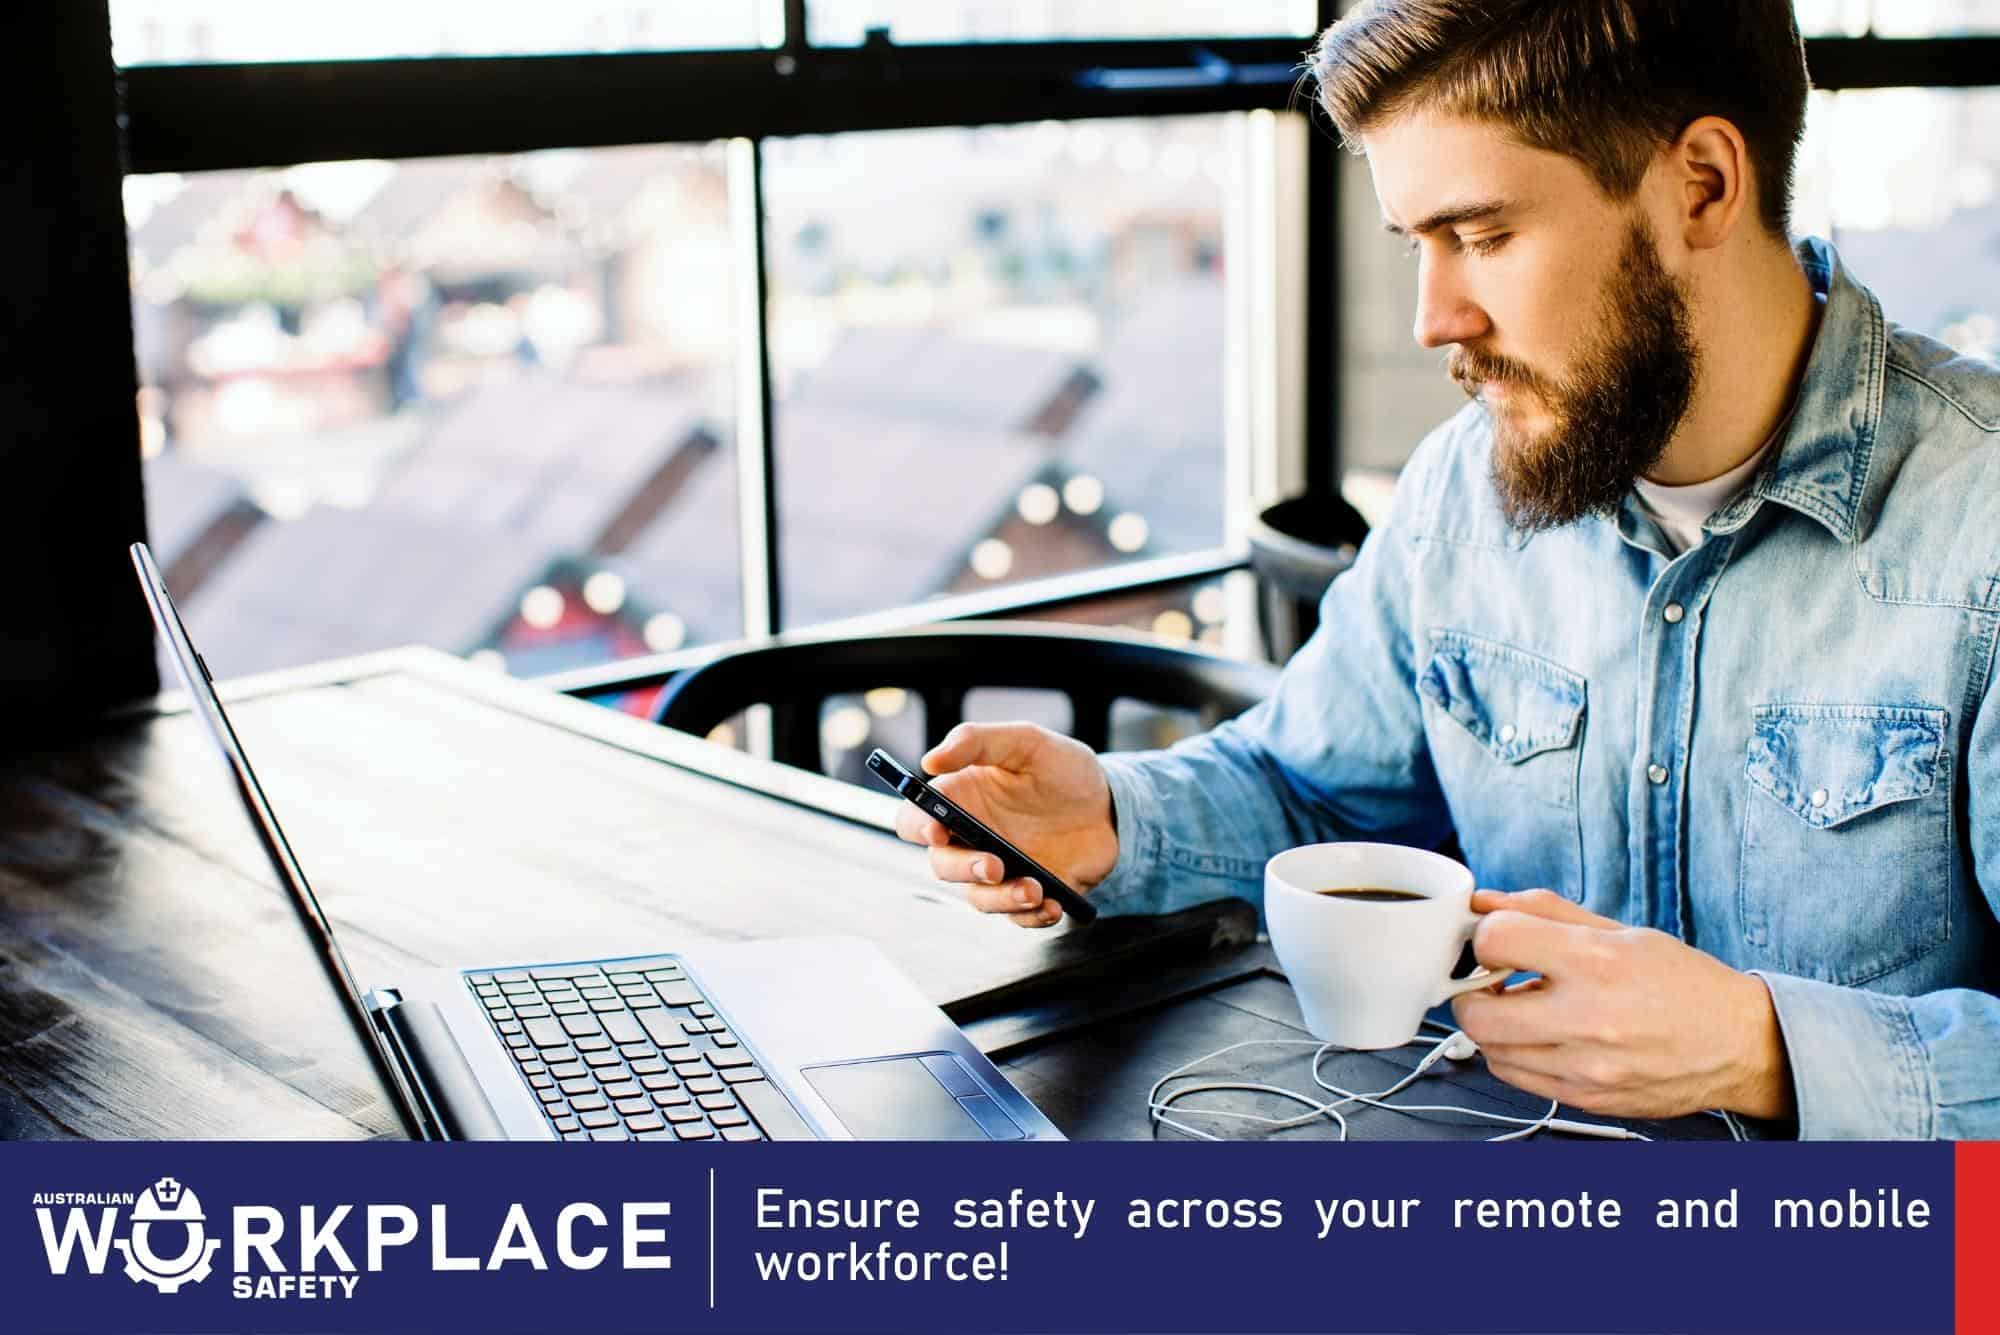 Ensure safety across your remote and mobile workforce!